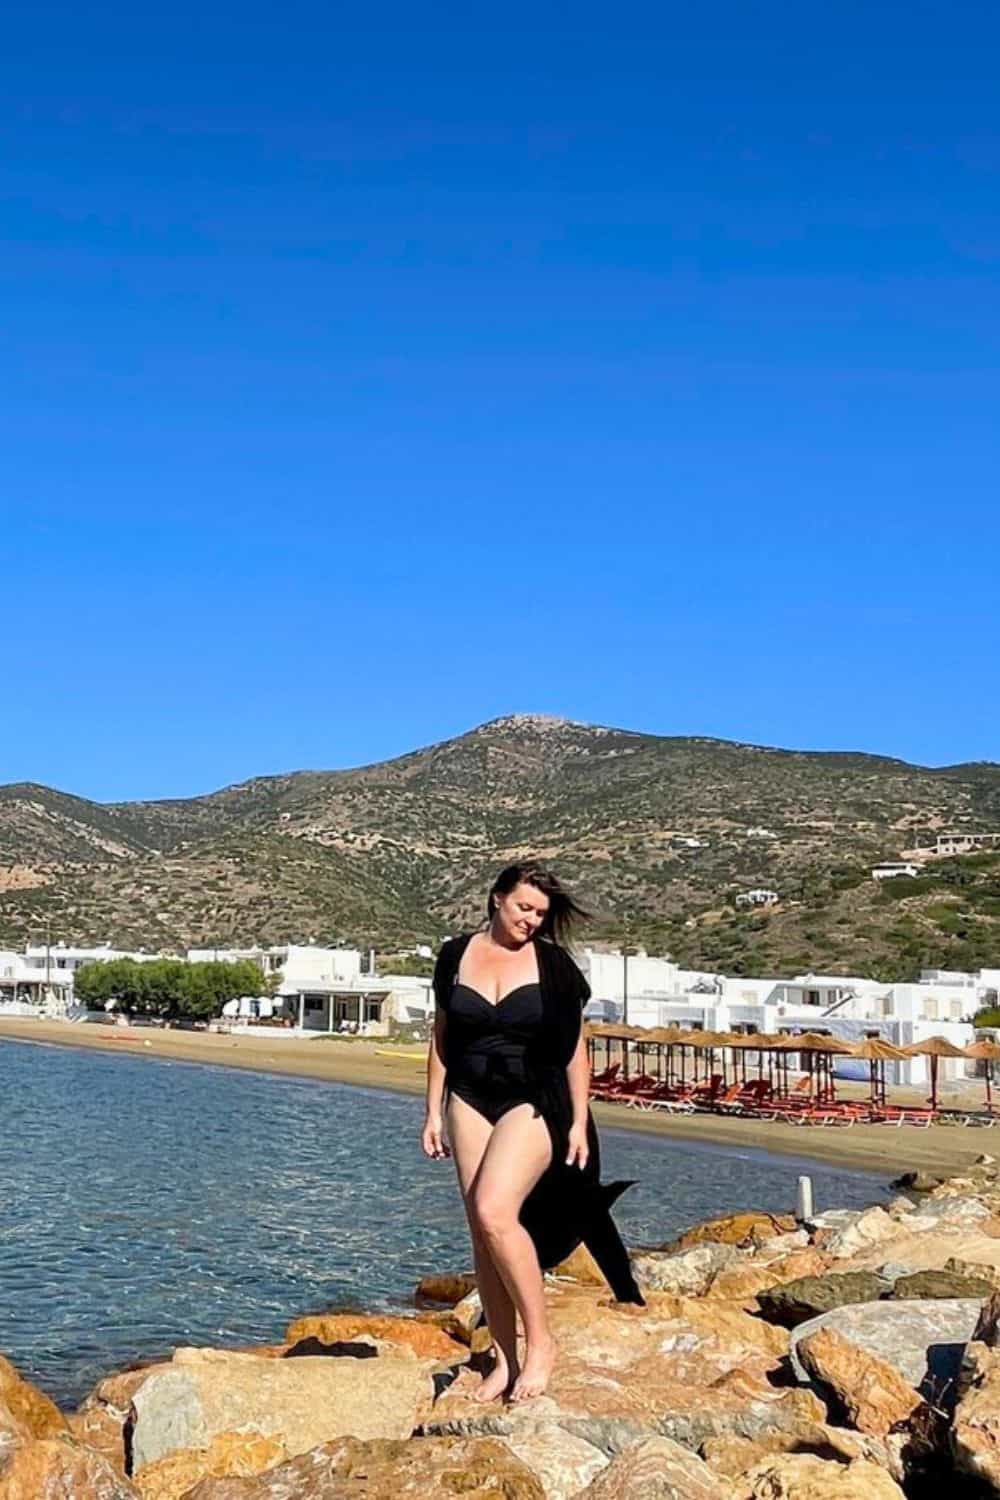 A woman in a chic black swimsuit poses gracefully on the rocky shore of a Sifnos beach, with the island's hilly landscape stretching out in the background under a clear sky, evoking the leisure and beauty of a seaside getaway.